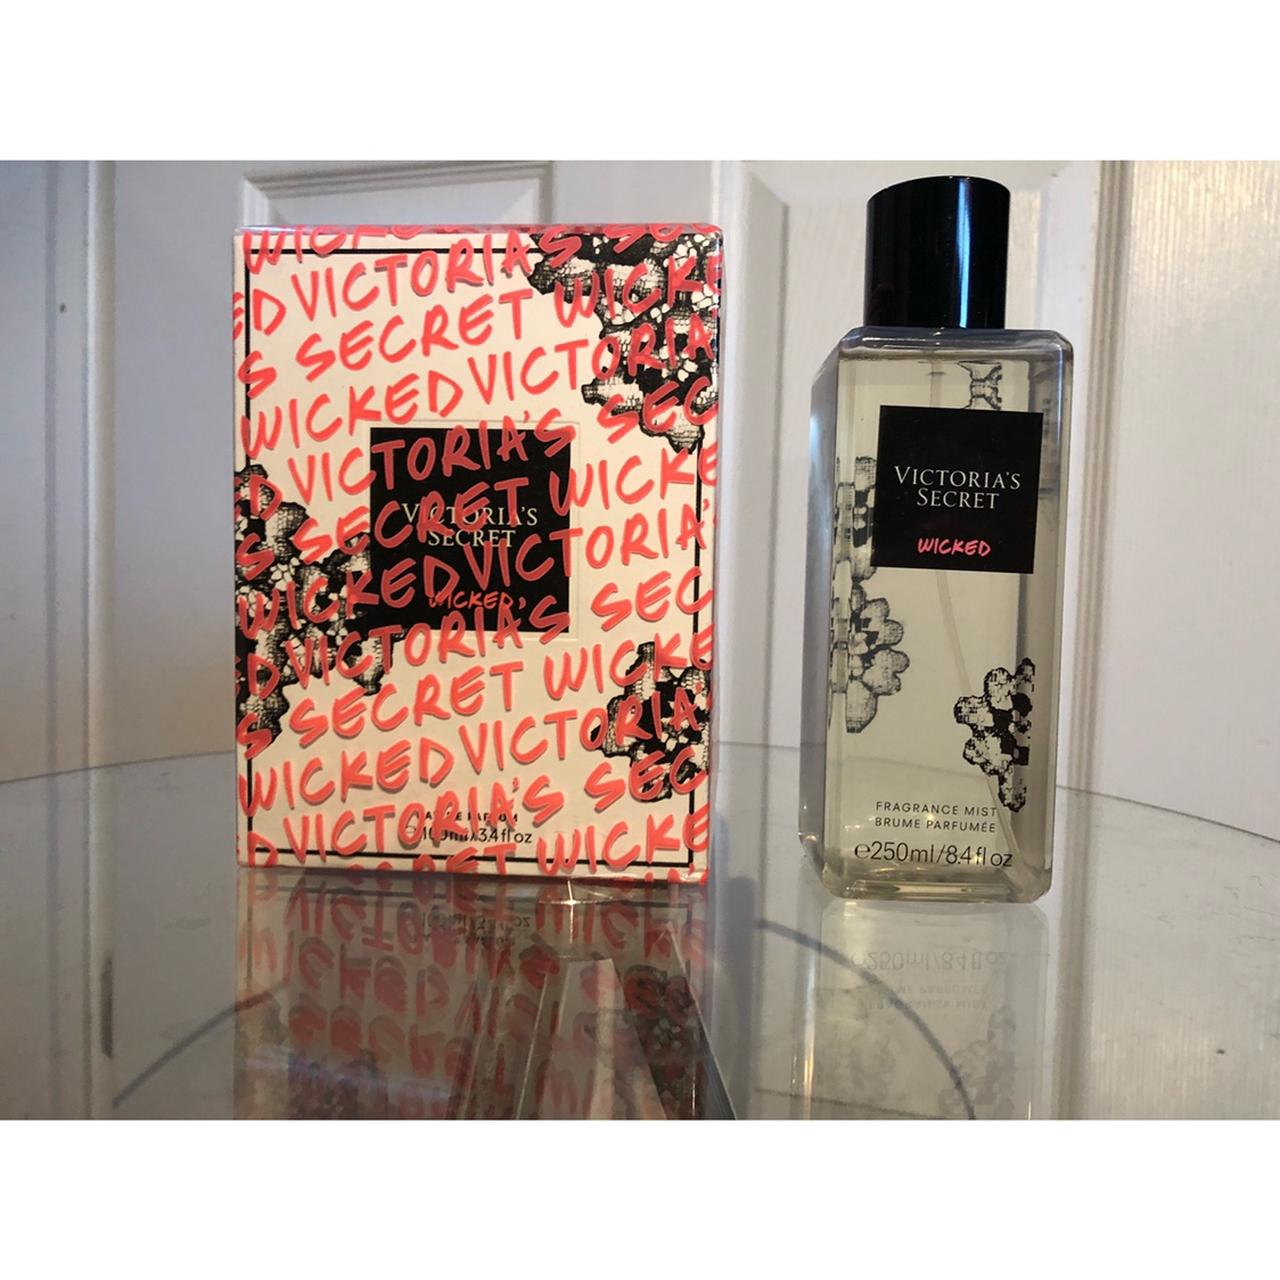 Discontinued Victoria Secret wicked perfume and - Depop